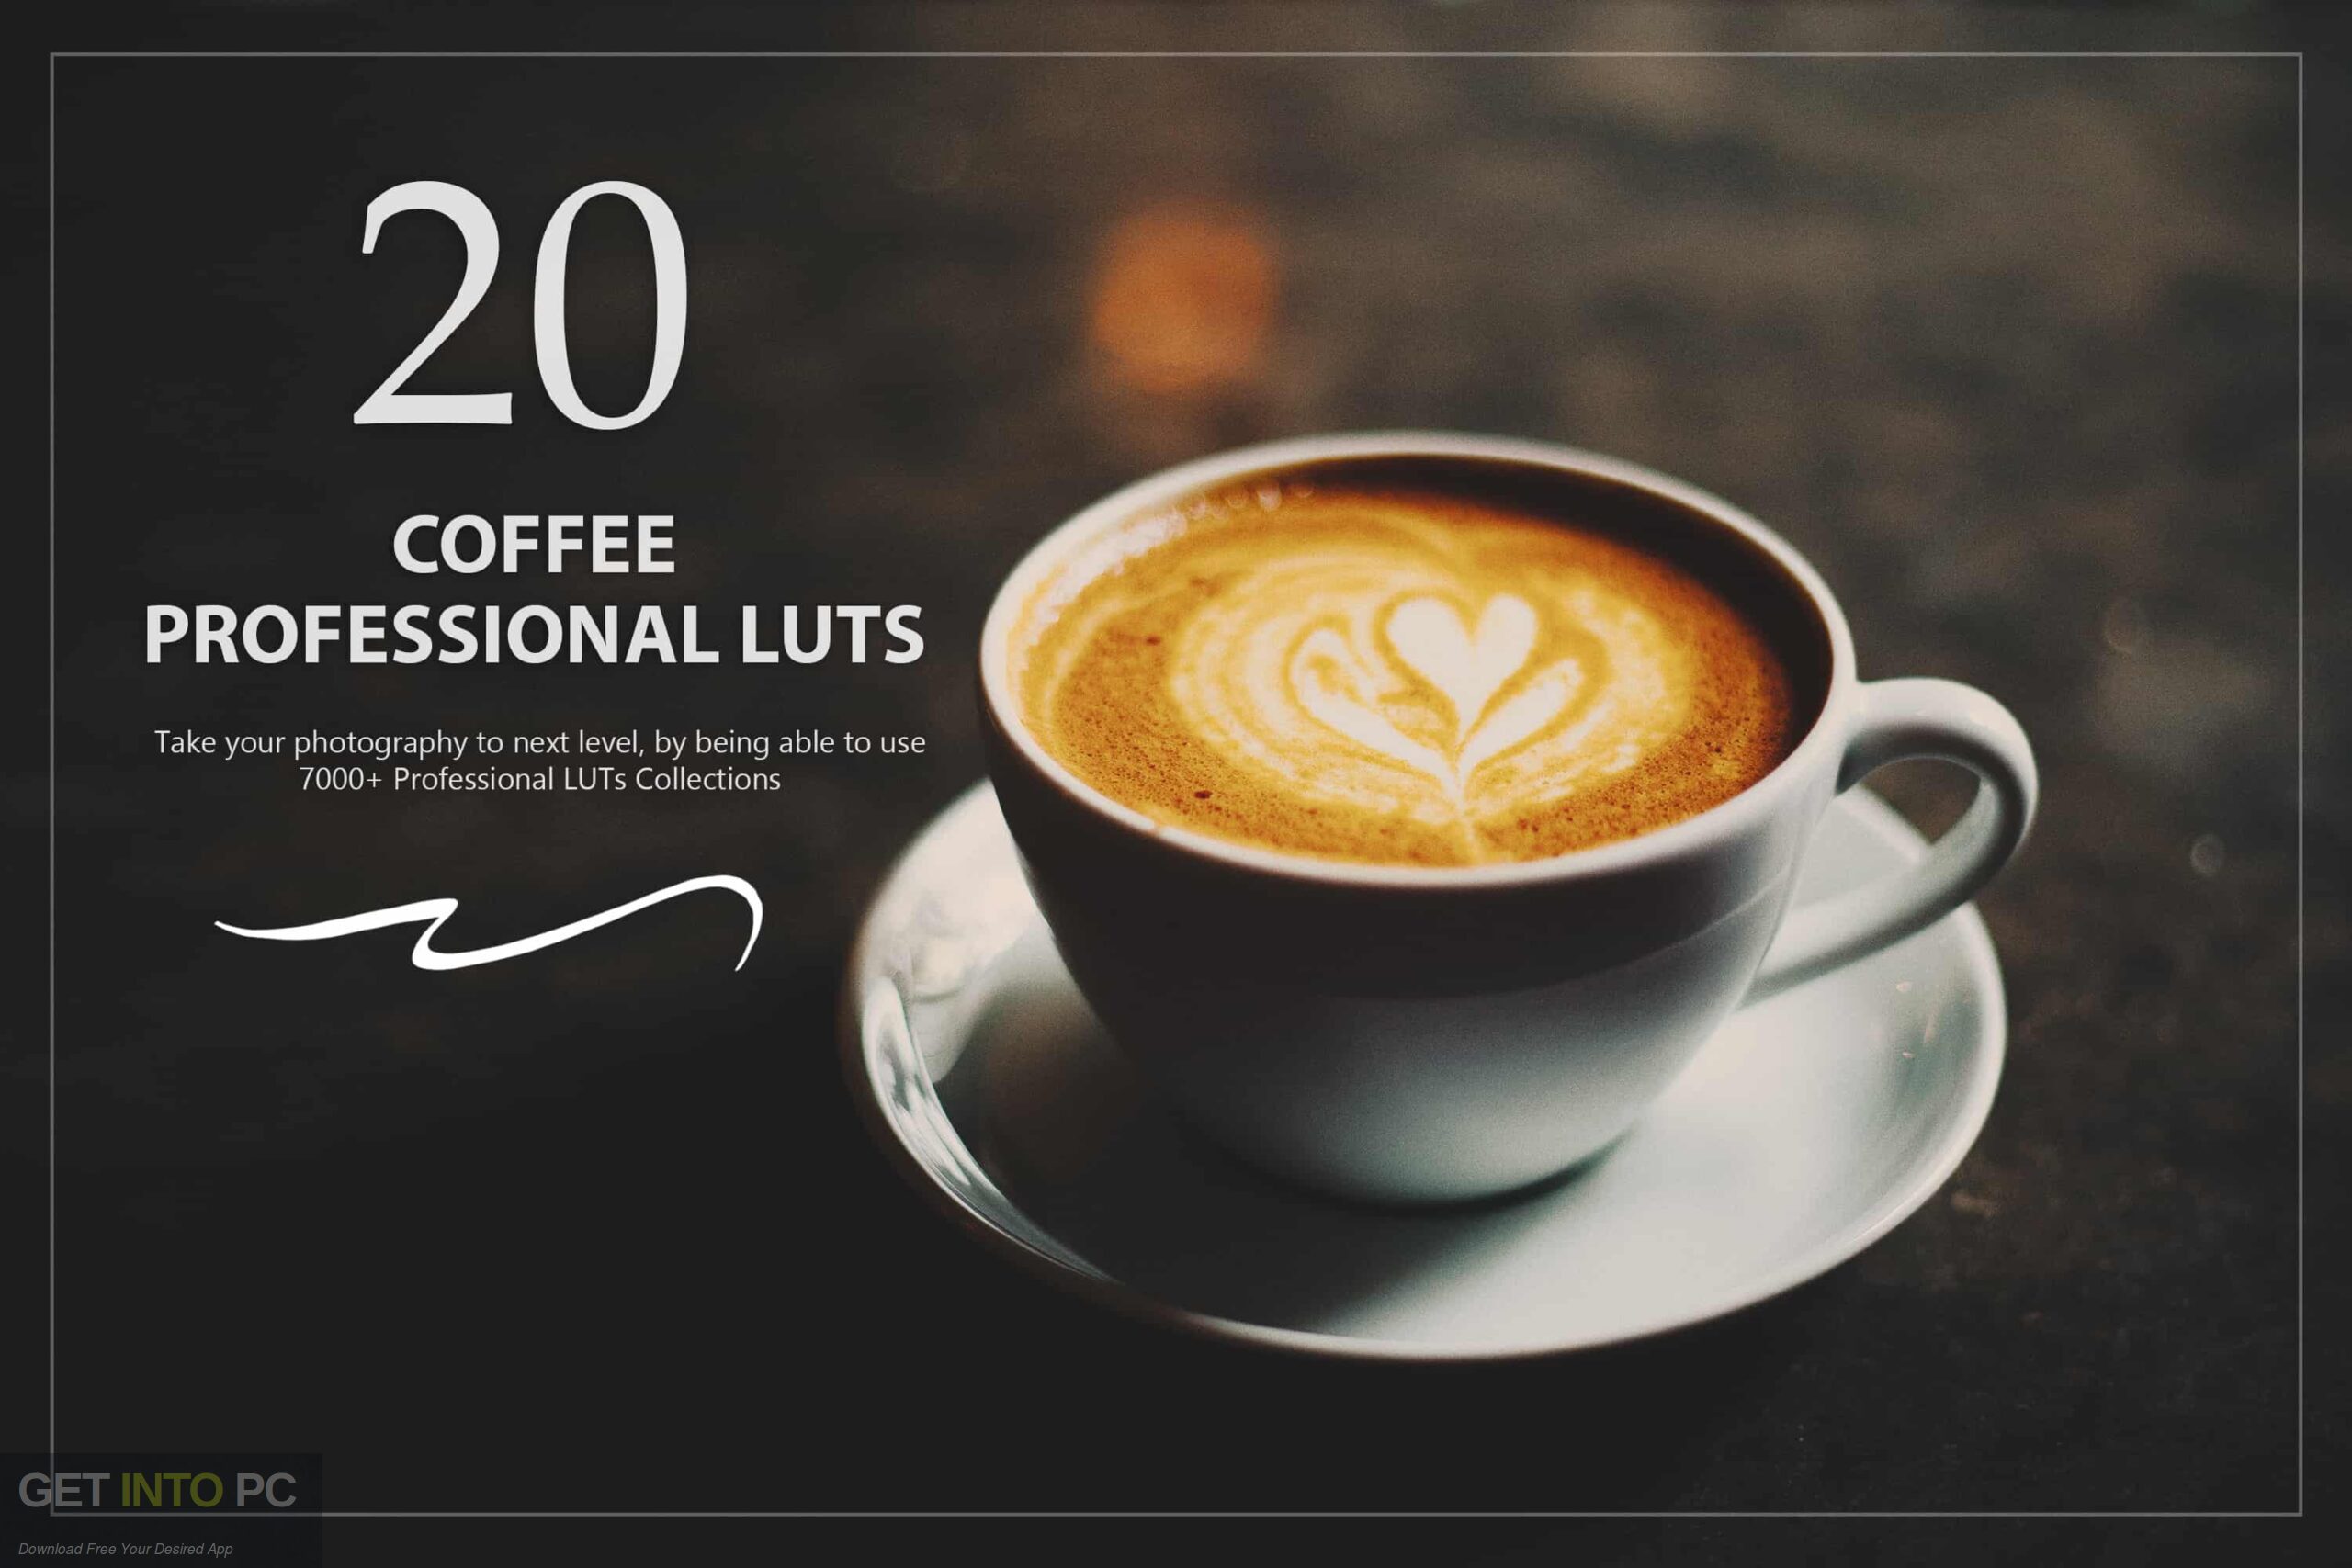 VideoHive-Aesthetic-Coffee-Luts-CUBE-Direct-Link-Download-GetintoPC.com_.jpg